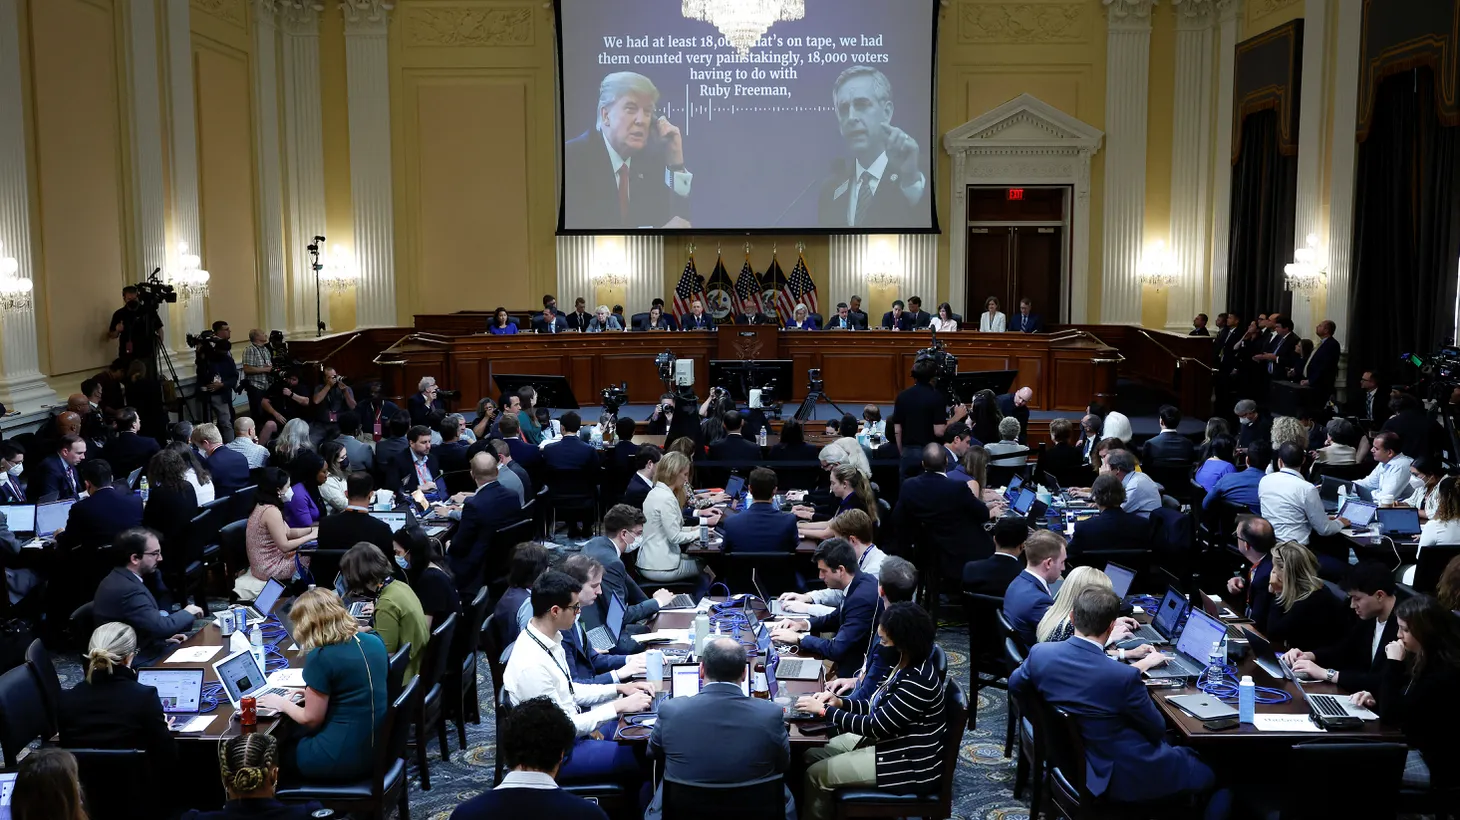 A transcript of a phone call between former U.S. President Donald Trump and Georgia Secretary of State Brad Raffensperger appears on a video screen during the fourth public hearing of the U.S. House Select Committee to investigate the January 6, 2021 attack on the U.S. Capitol, in Washington, D.C., June 21, 2022.